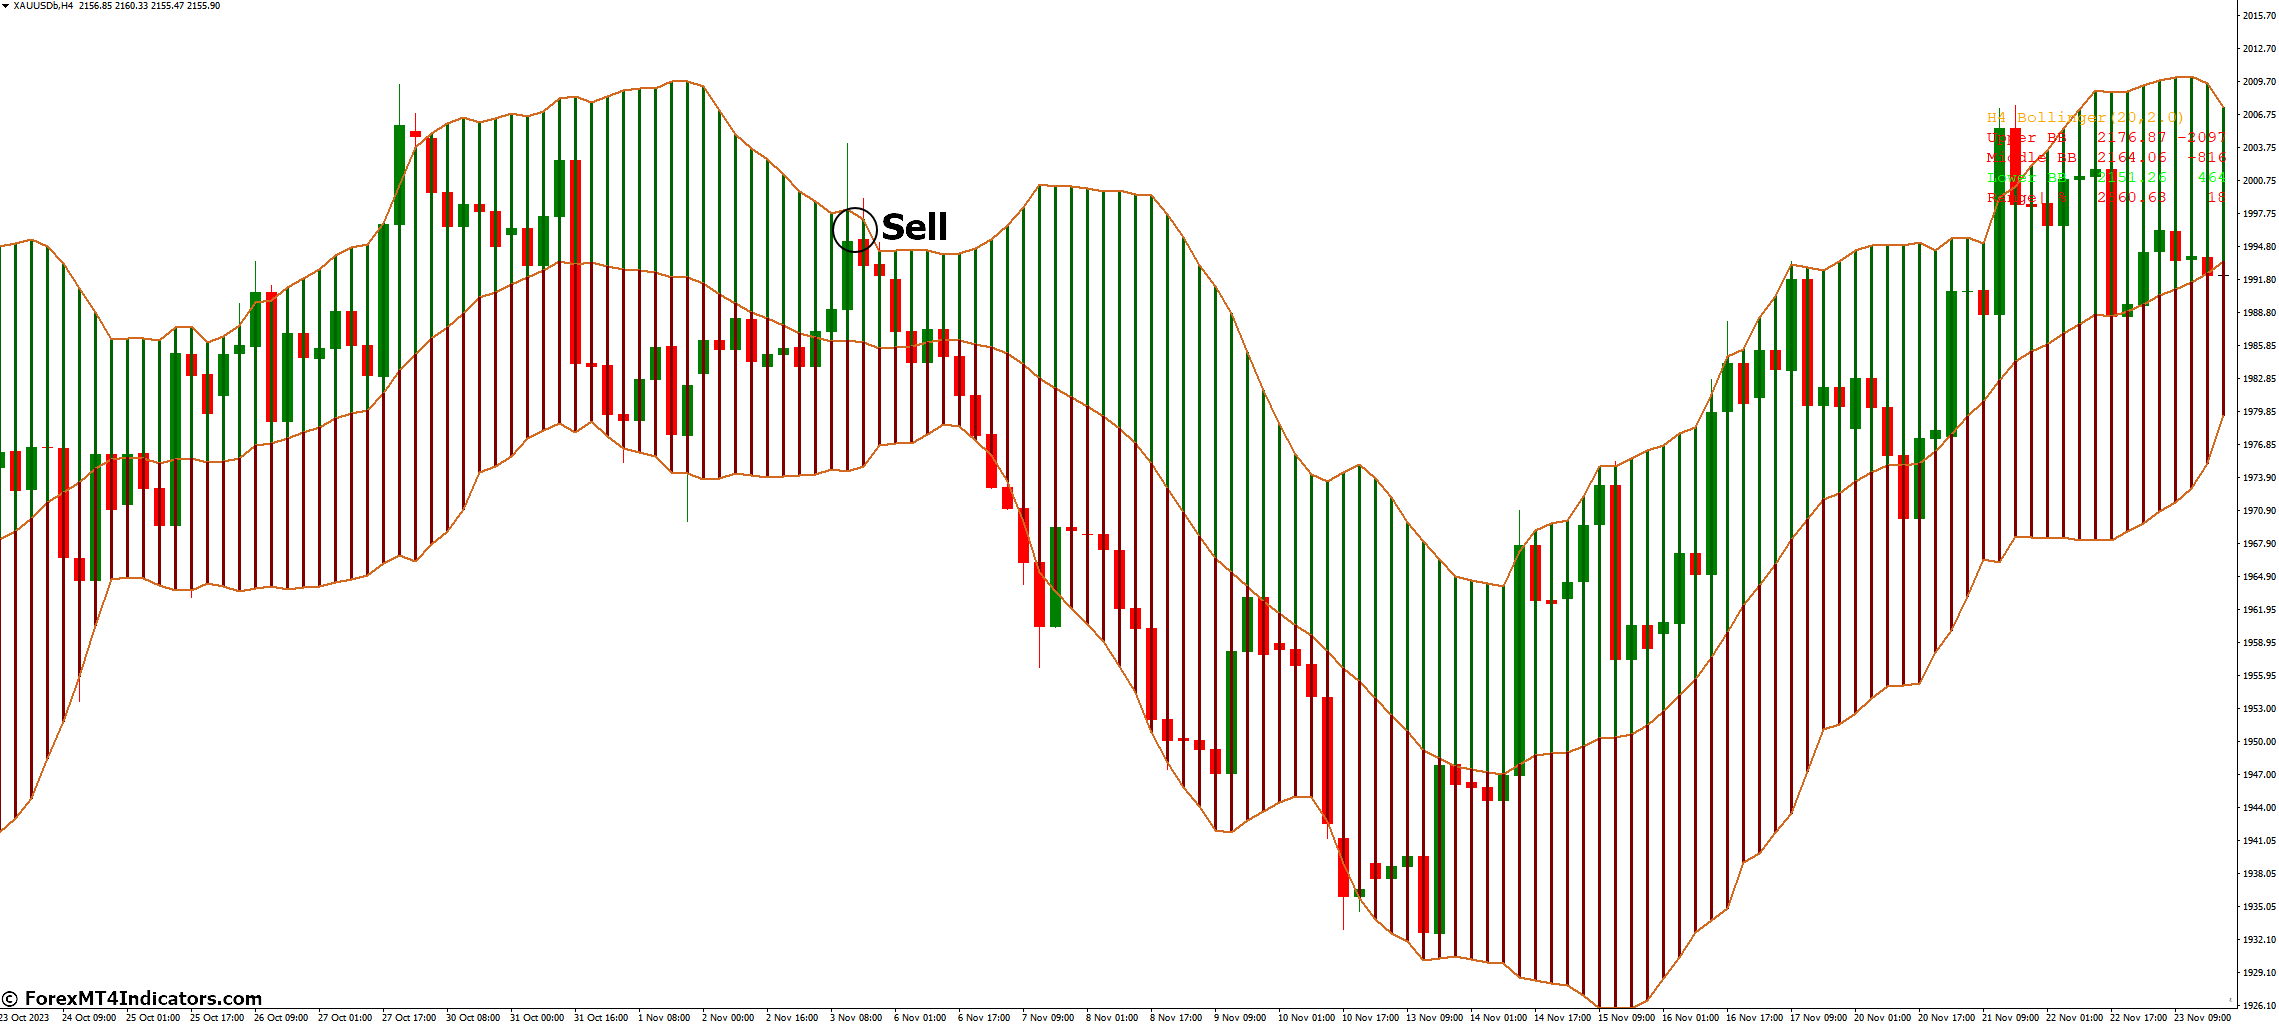 How to Trade with Advanced Bollinger Bands Indicator - Sell Entry